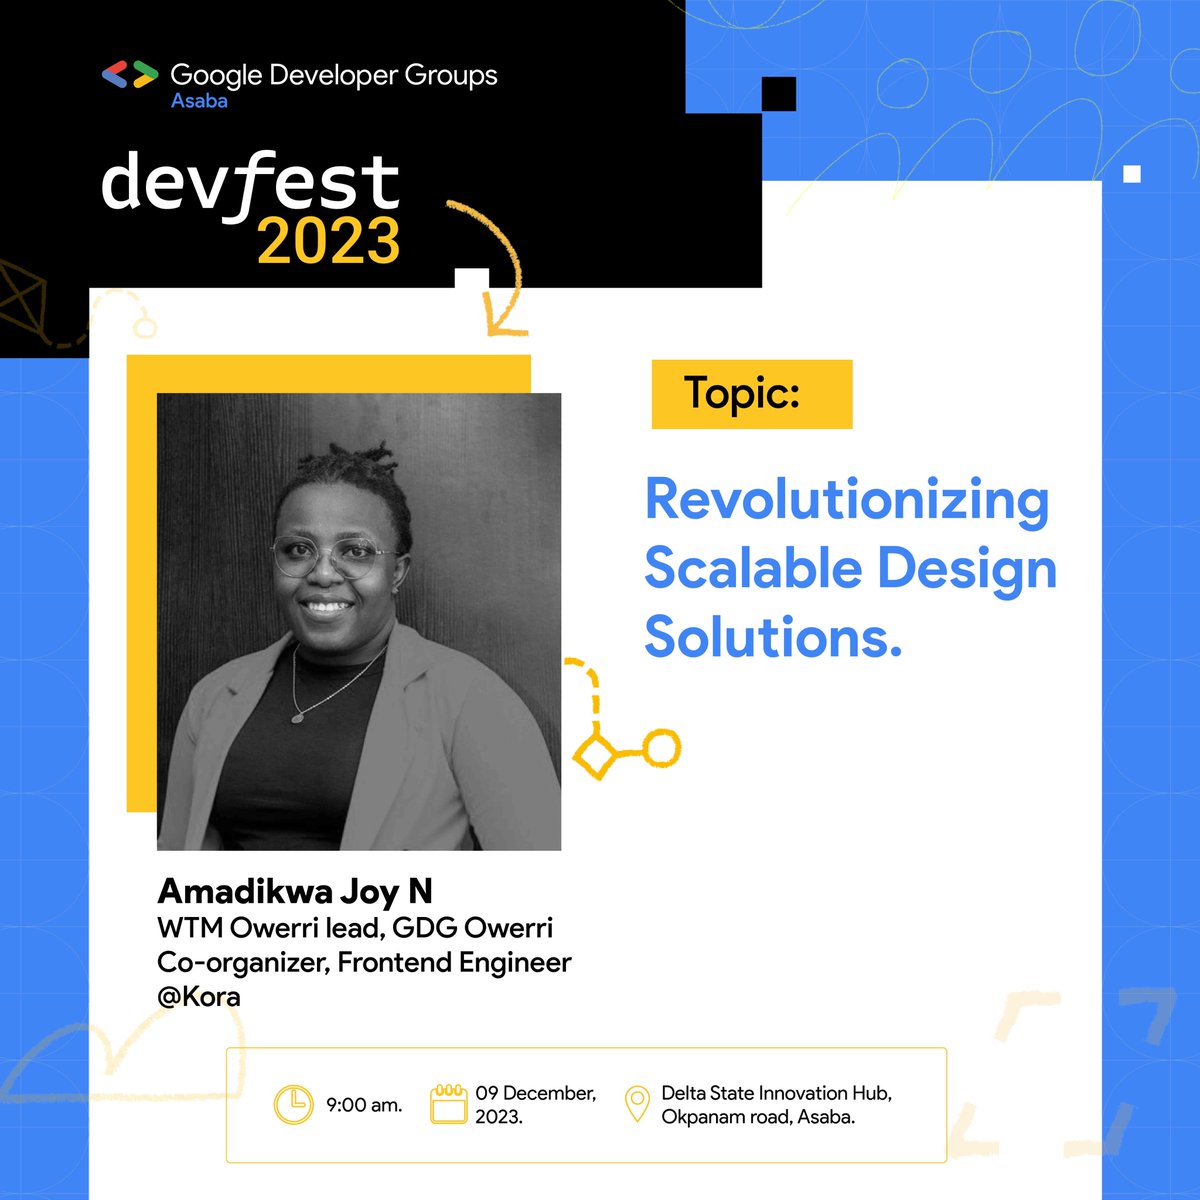 Excited to announce @AmadikwaJoy, a skilled Frontend Engineer at Kora🚀 She'll be sharing insights on 'Revolutionizing Scalable Design Solutions' at DevFest Asaba. See you there! Register: gdgasaba.com #devFestAsaba23